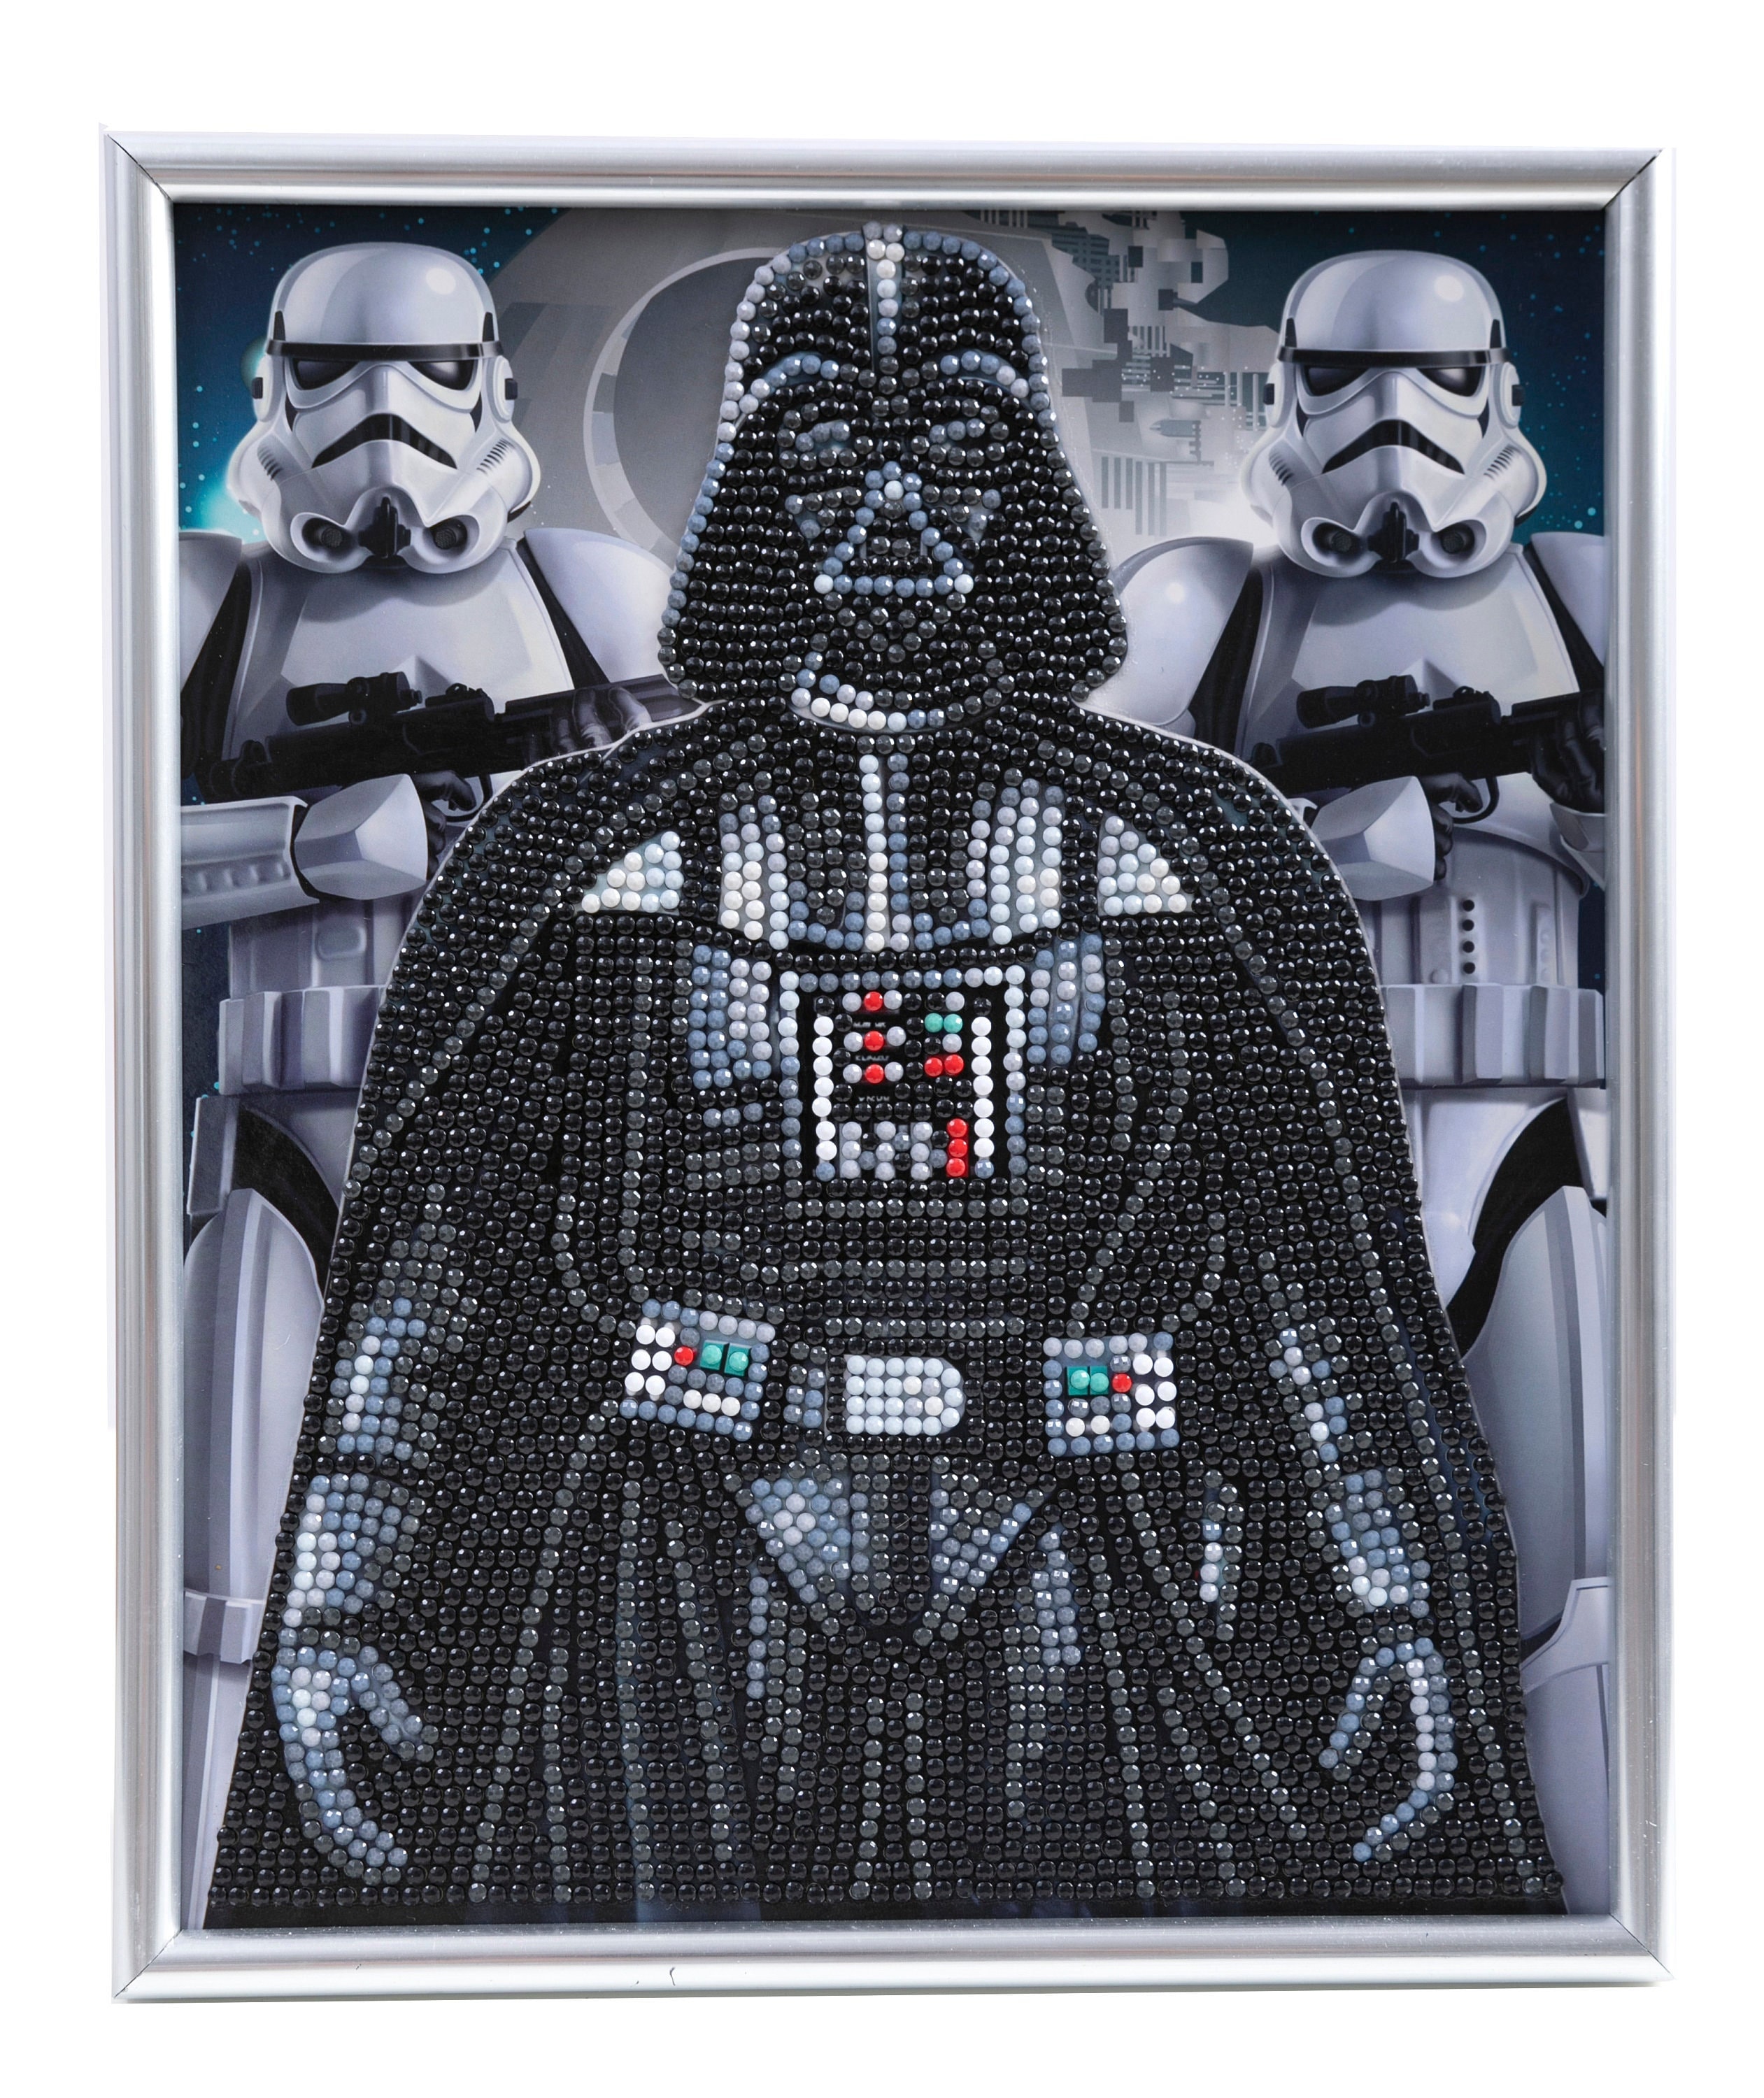 5d Diamond Painting Kit Miotlsy By Number On Canvas, Star Wars Darth Vader  Full Drill Crystal Rhinestone Embroidery For Interior Decoration Crafts Art